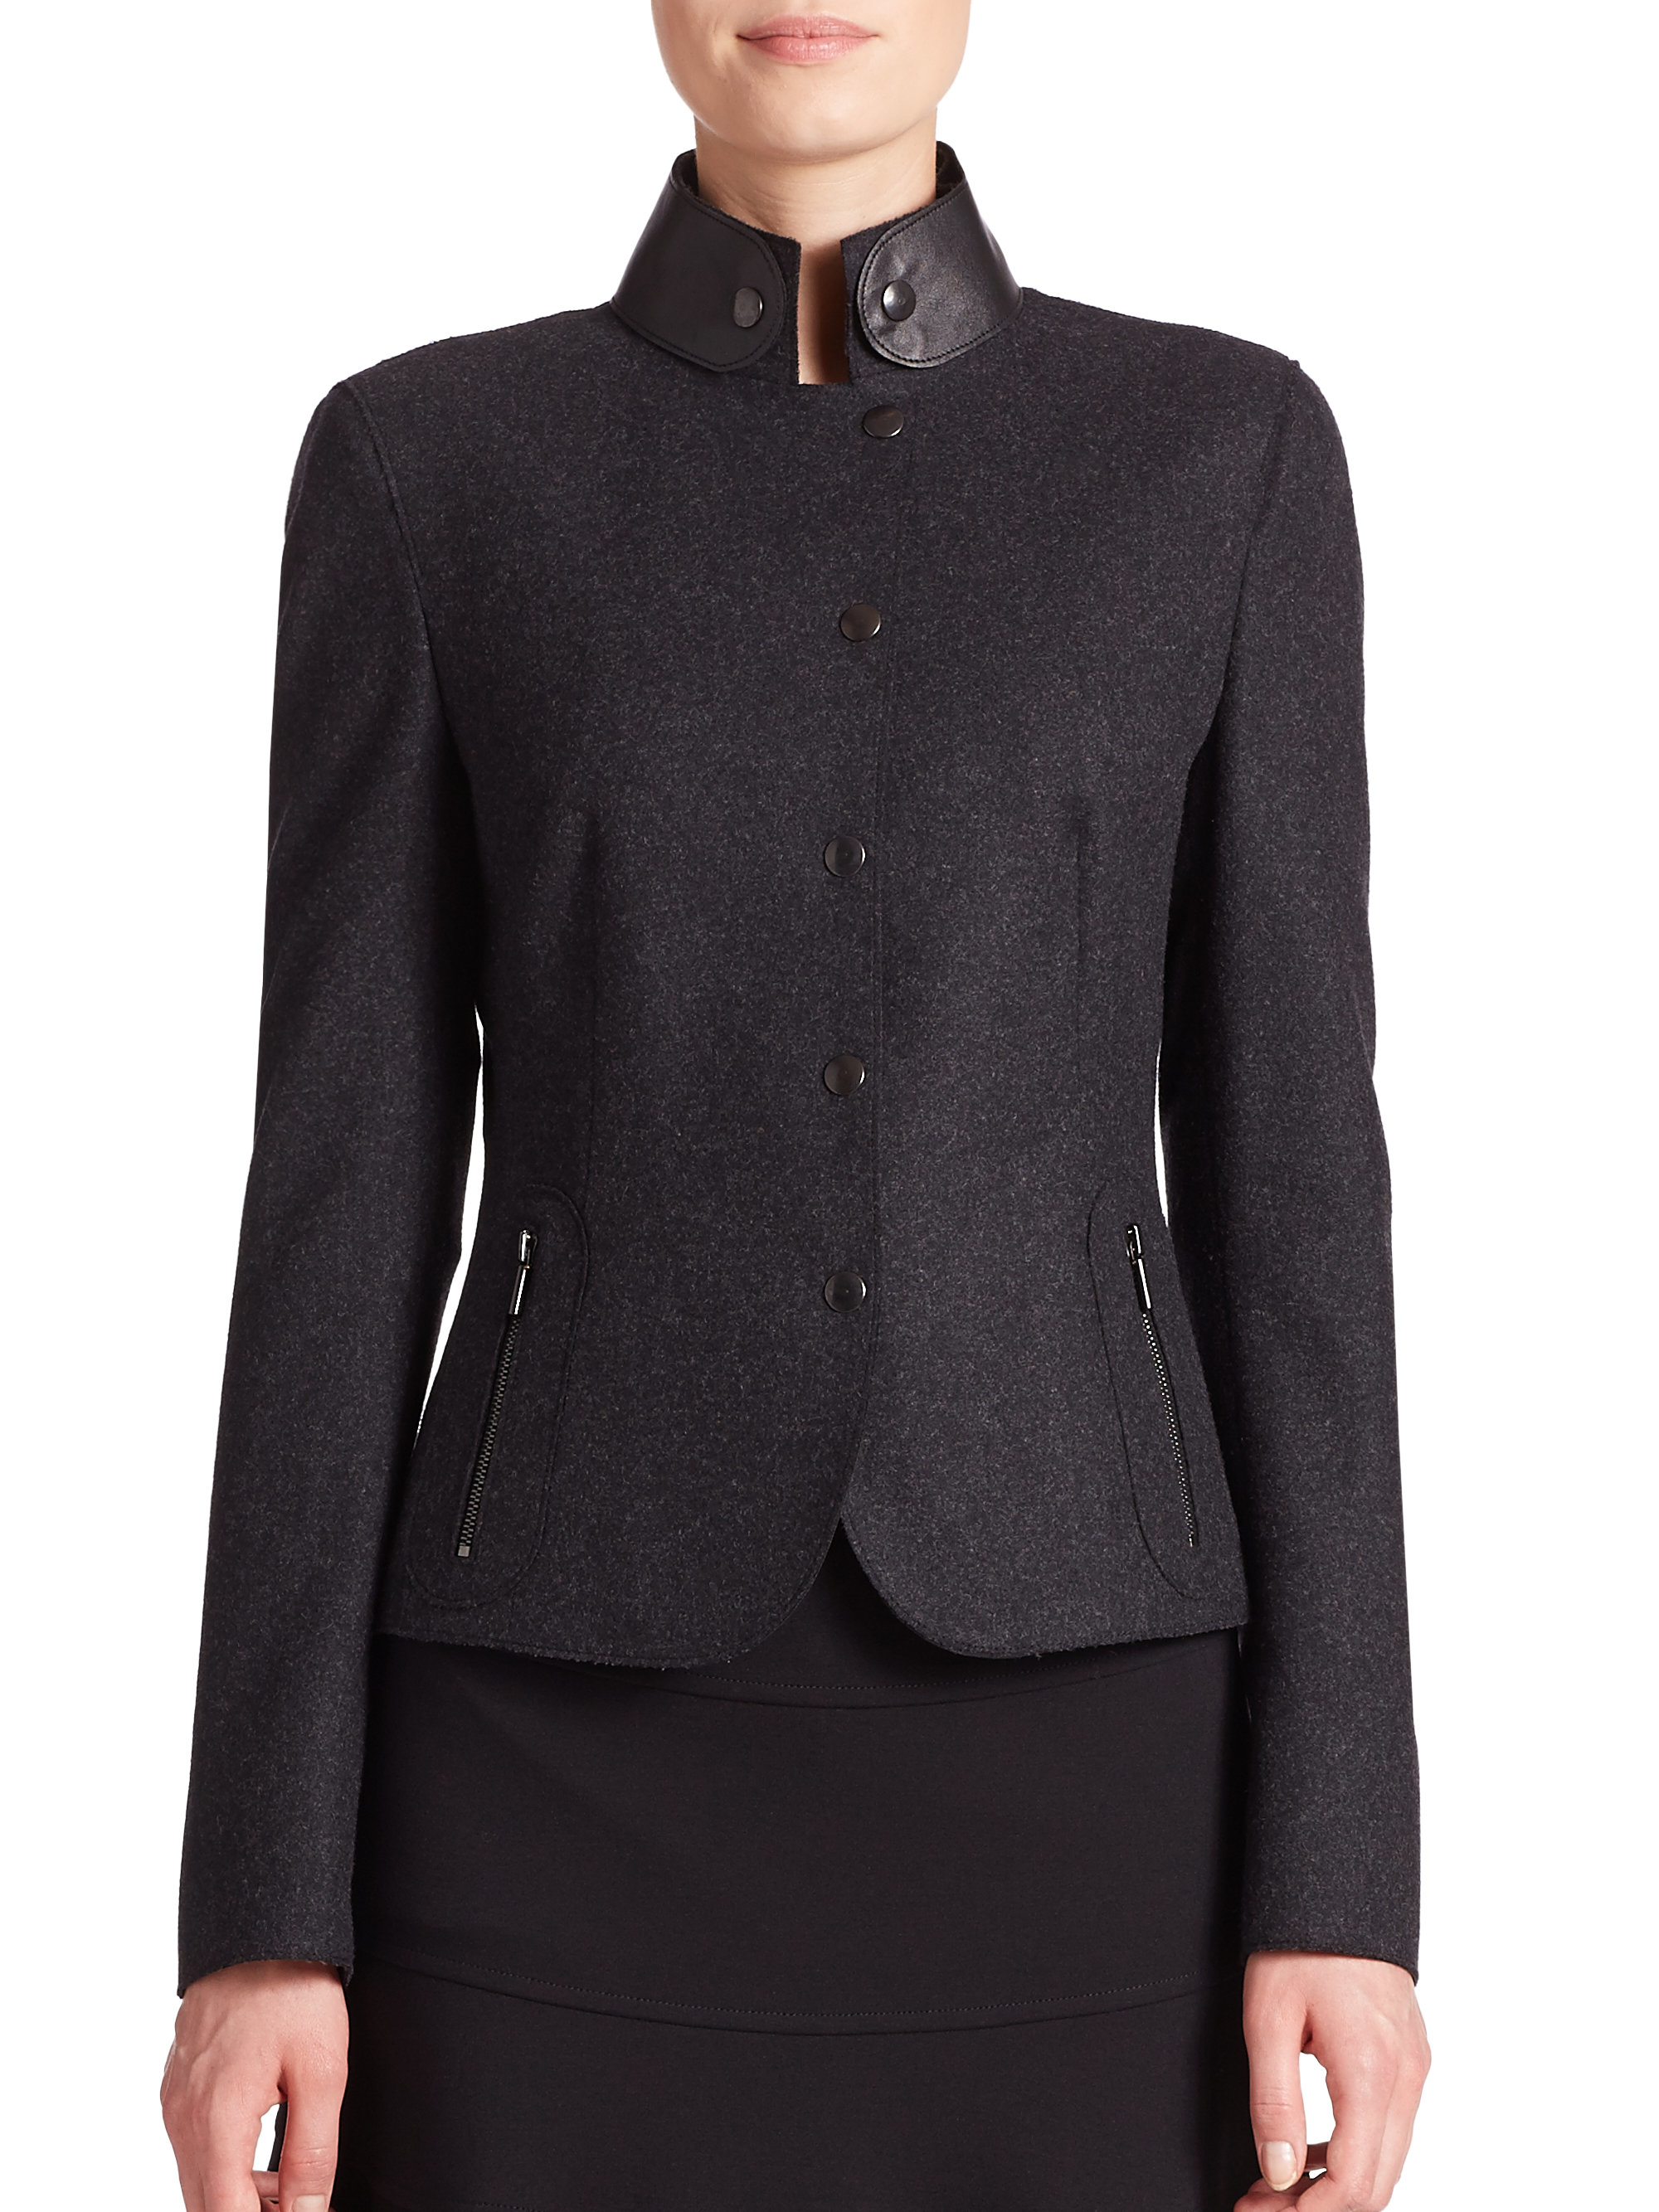 Lyst - Akris Punto Leather-collar Snap-front Jacket in Black